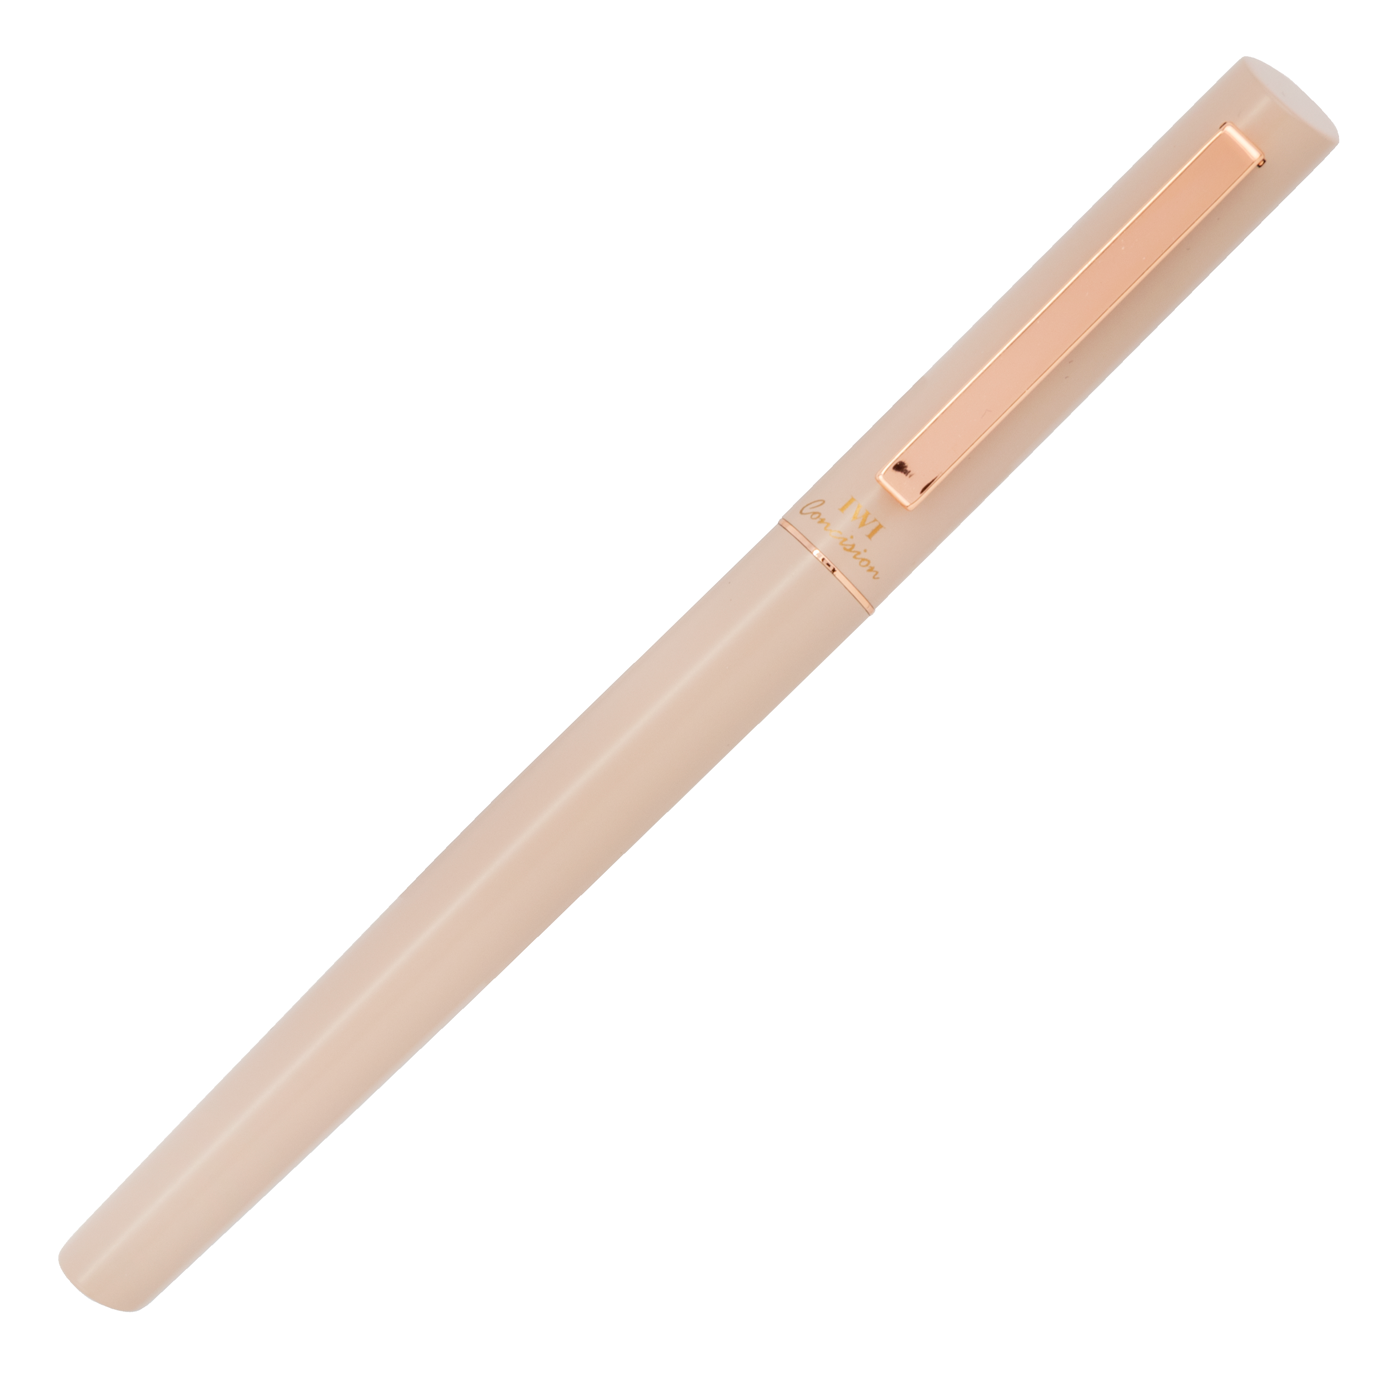 IWI Concision Rollerball - Soft Pink